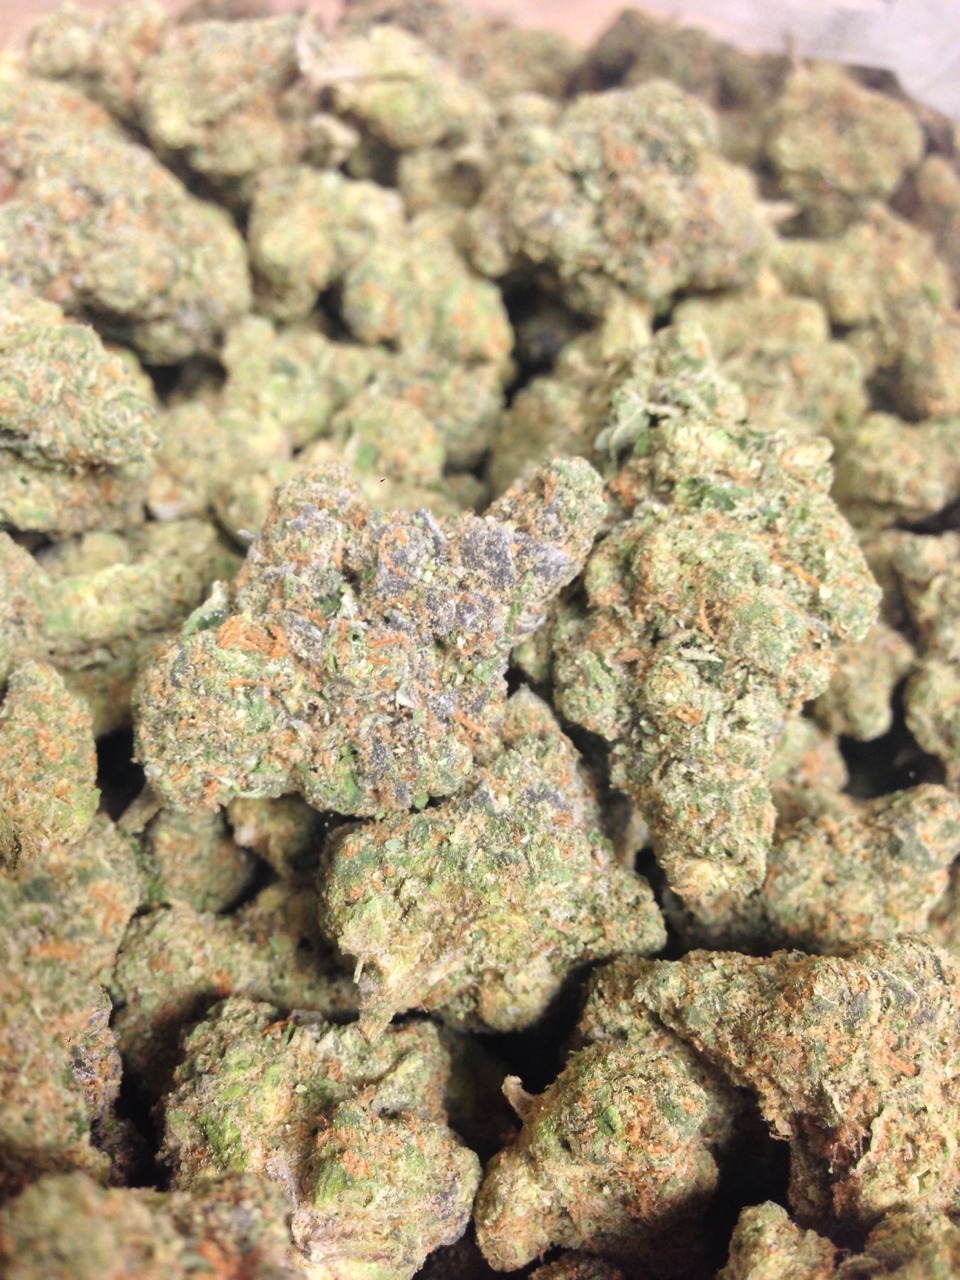 teelloo:  Girl Scout Cookies (Unedited) Durban poison x gdp x og kush 